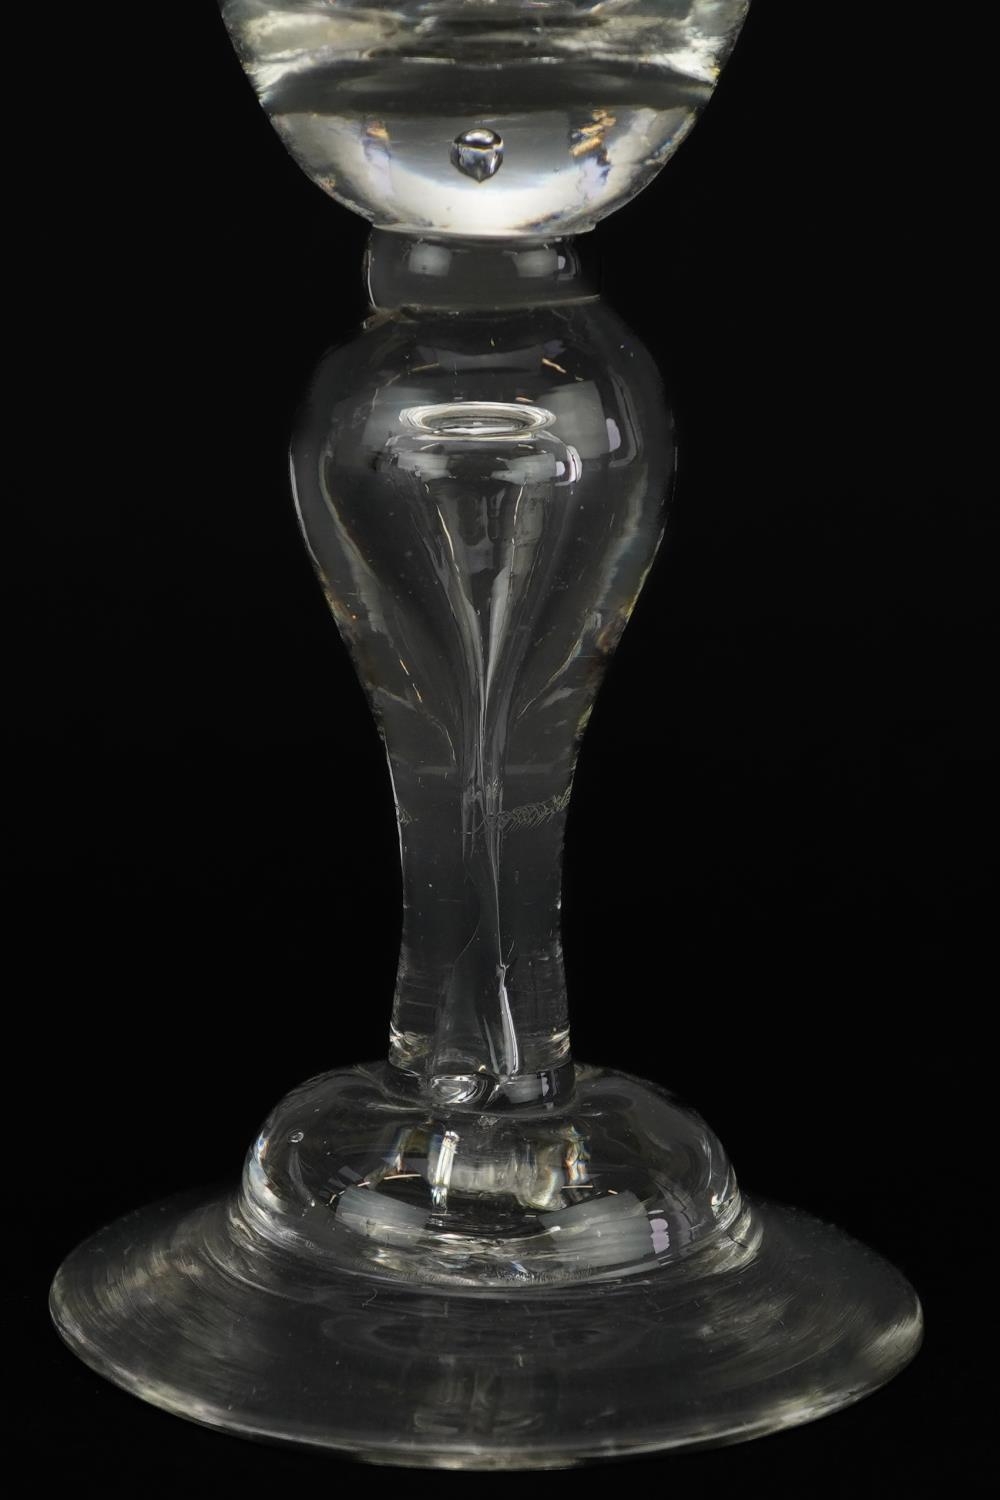 18th century wine glass with baluster stem, 14cm high - Image 2 of 4